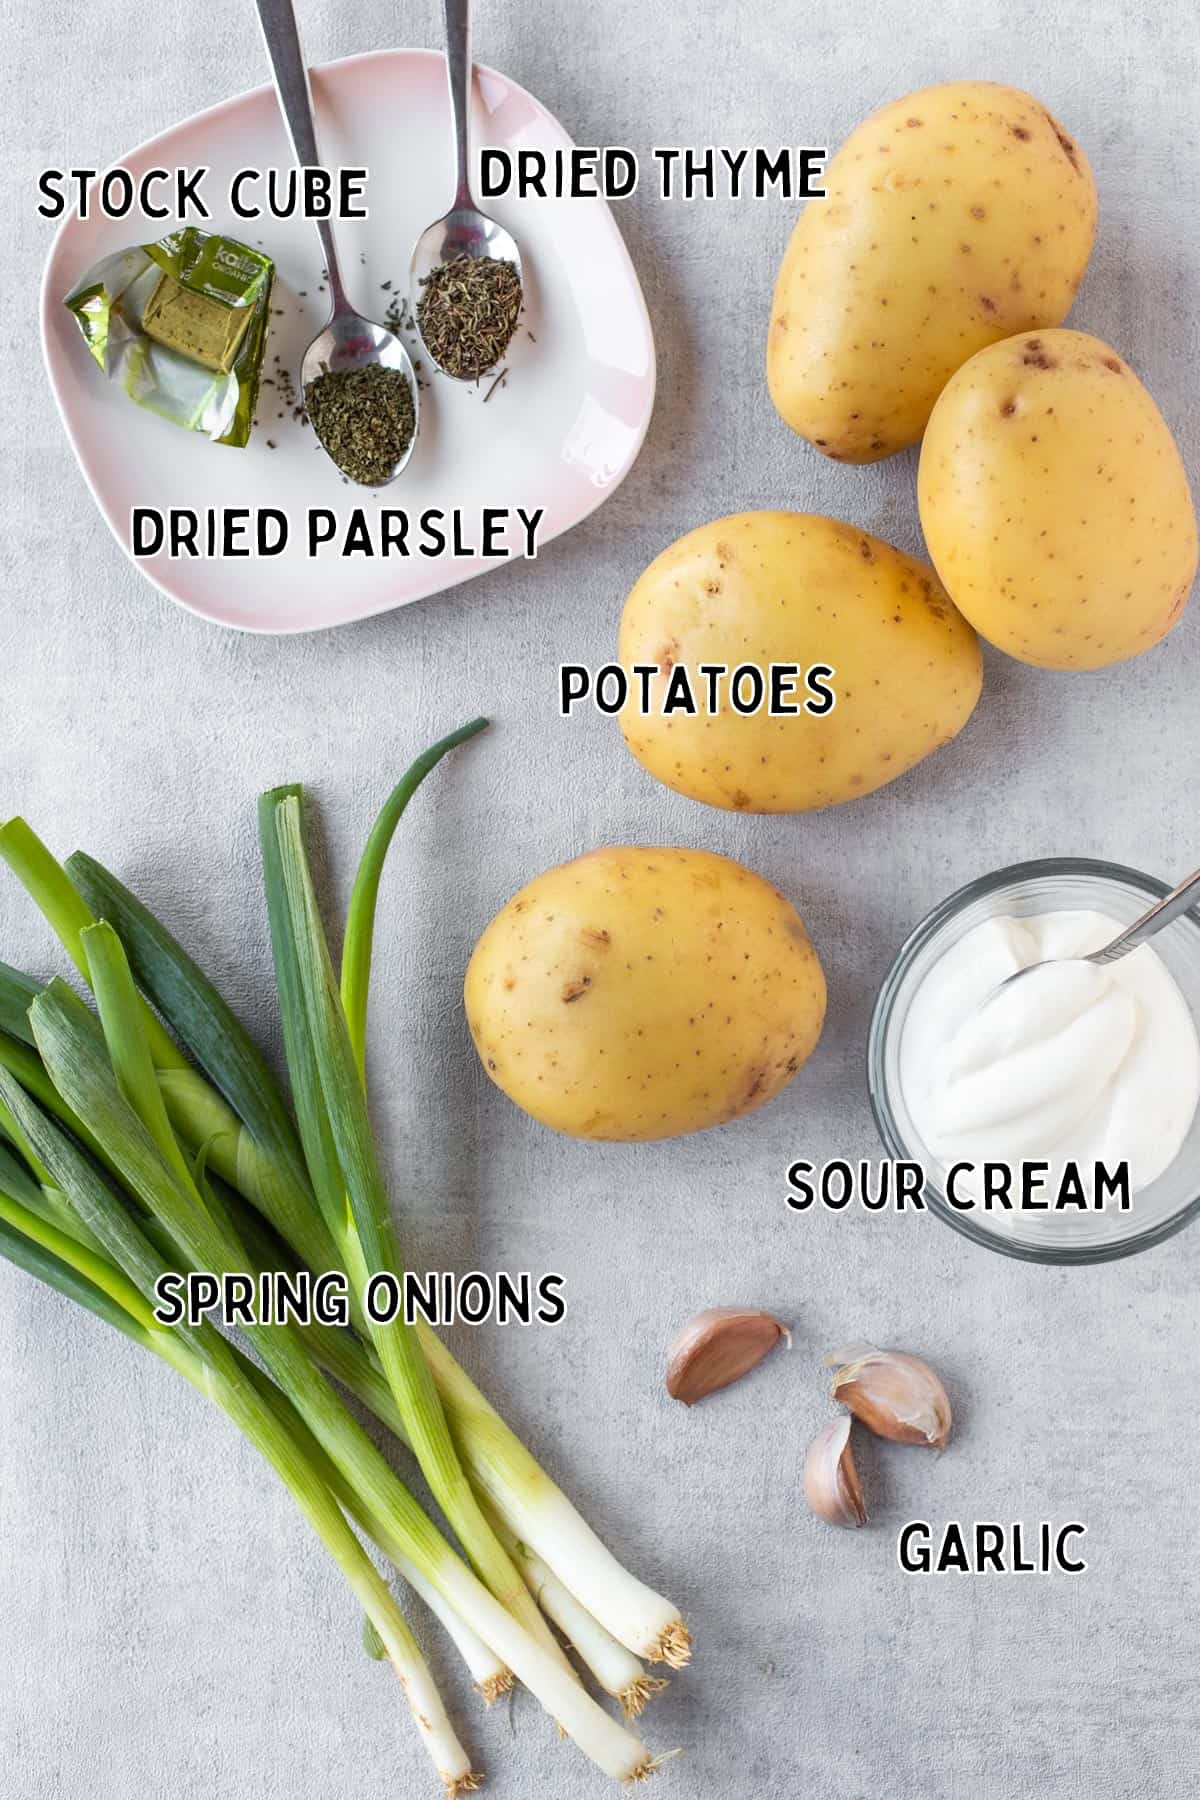 Ingredients for creamy potato and spring onion soup laid out with text overlay.